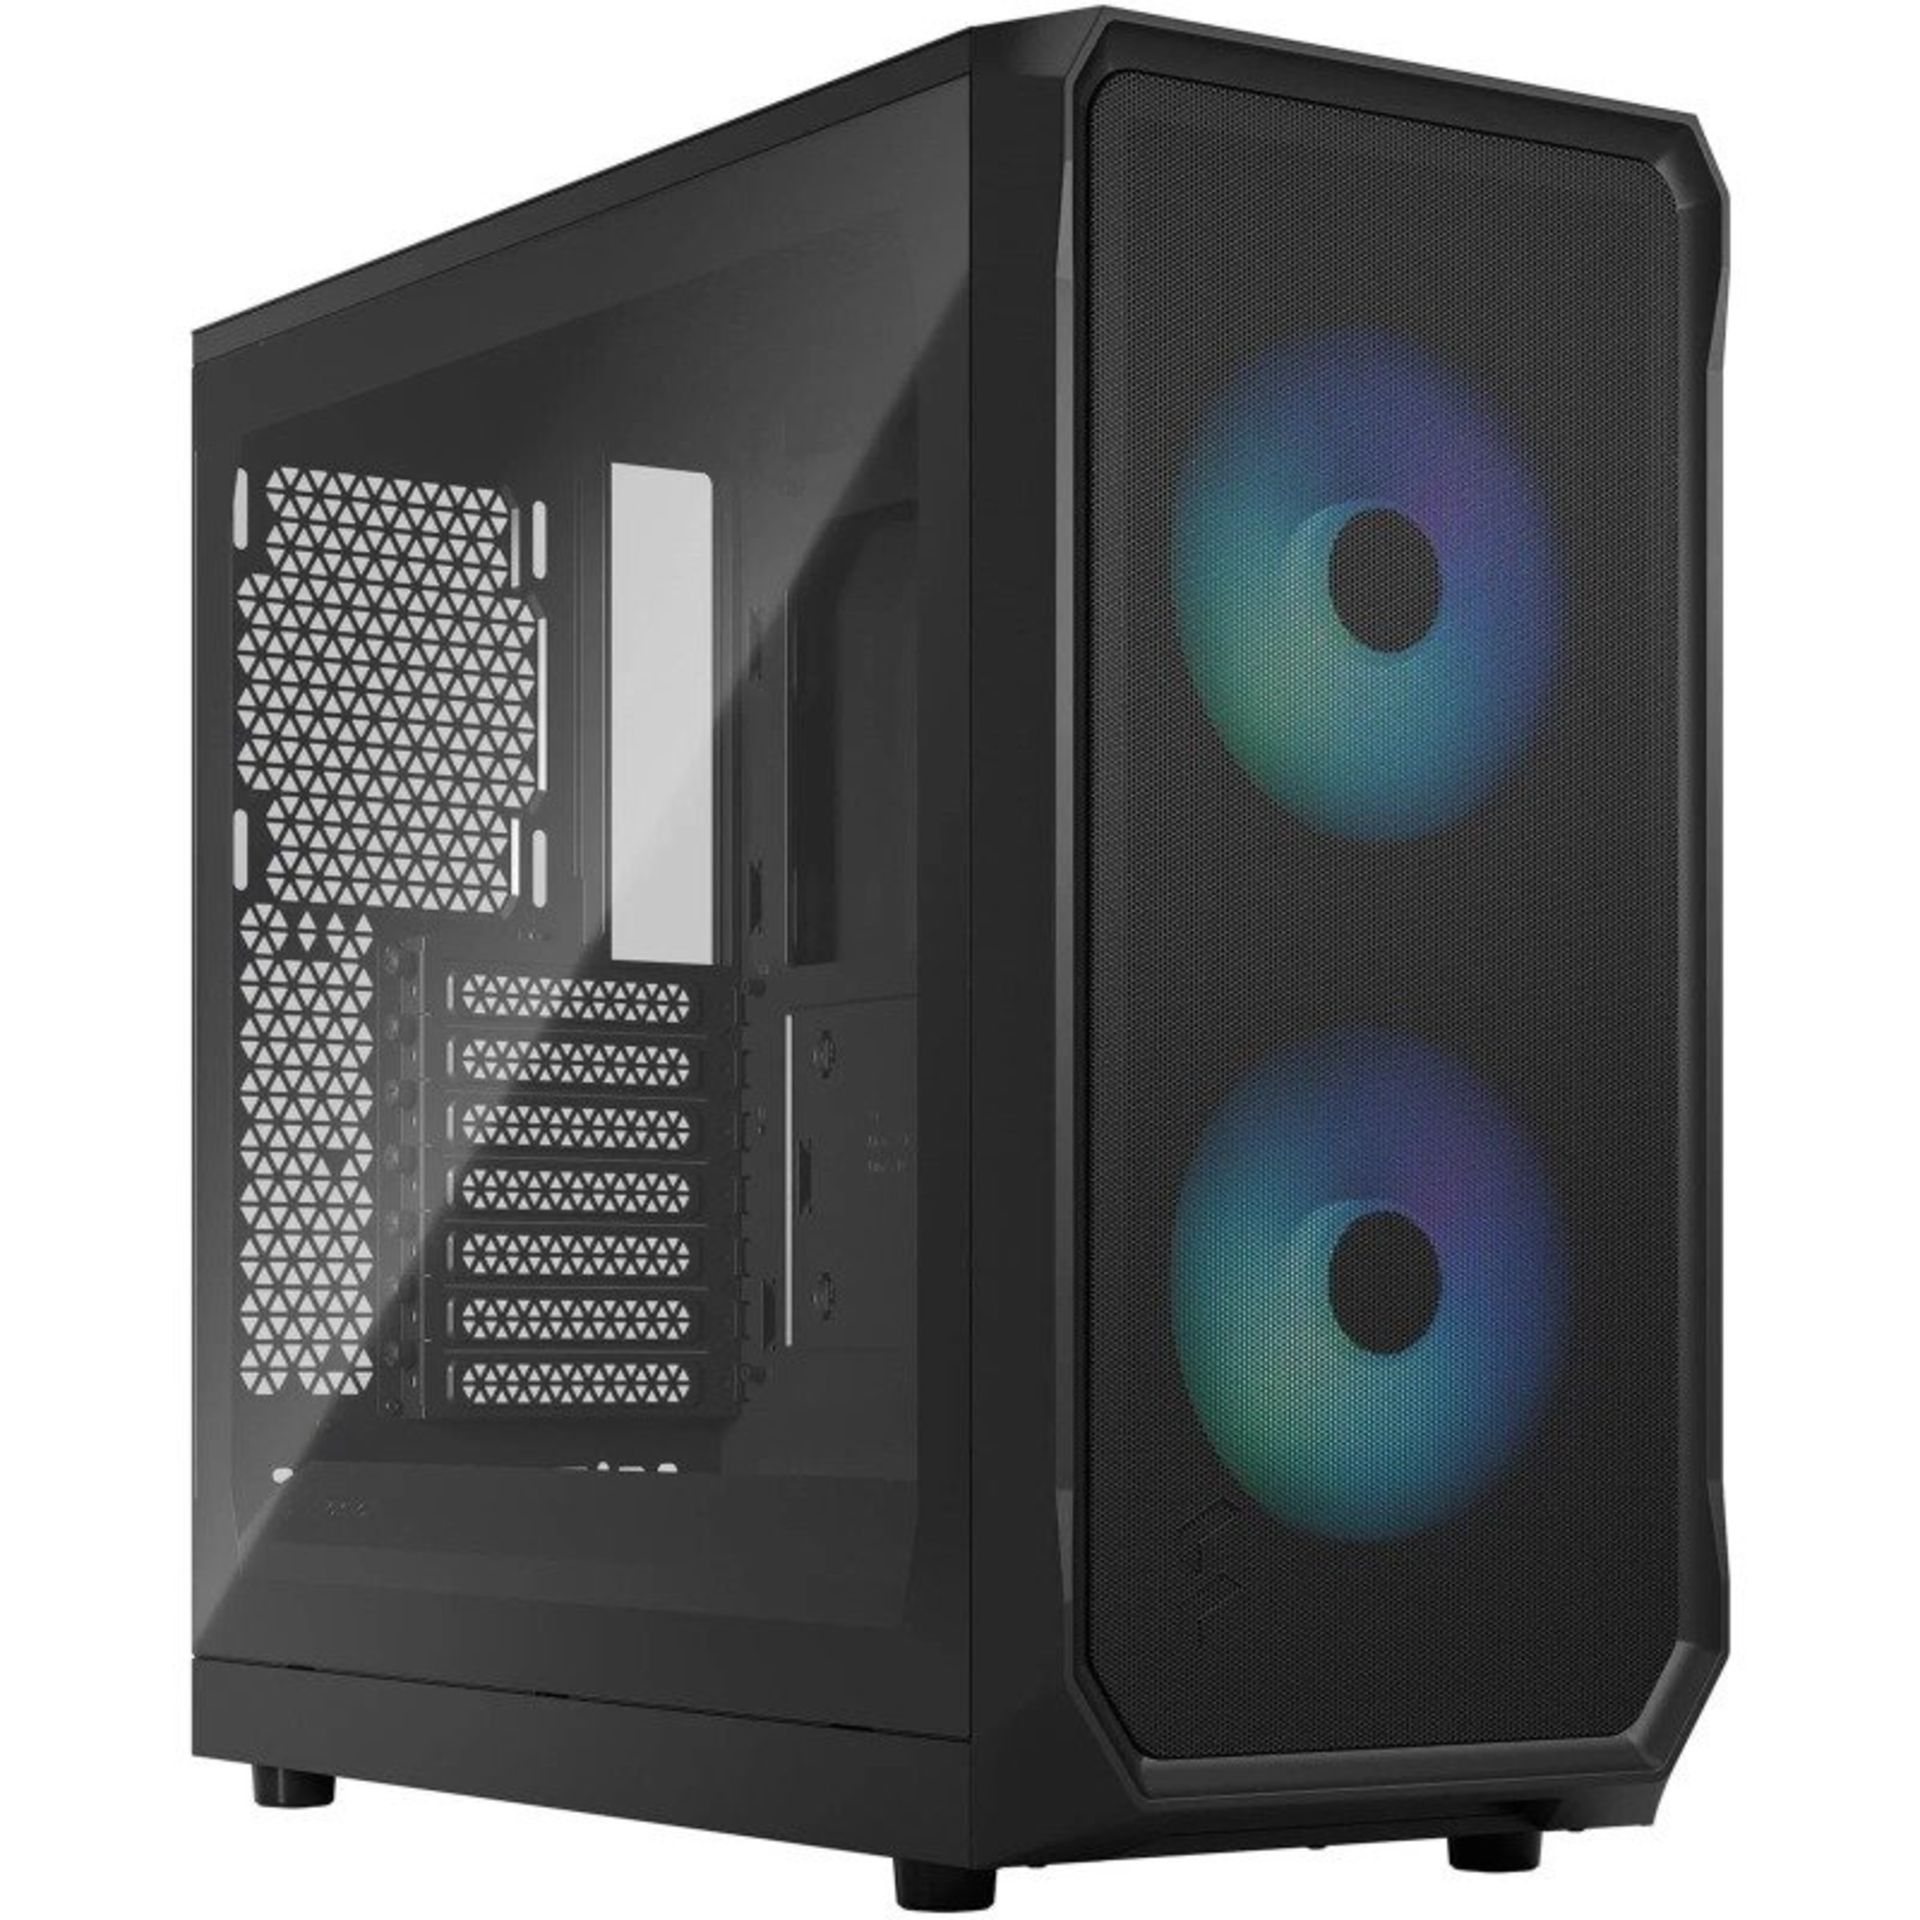 Fractal Design Focus 2 RGB Tempered Glass Clear Tint Gaming Computer Case Black. - P1. RRP £185.00.